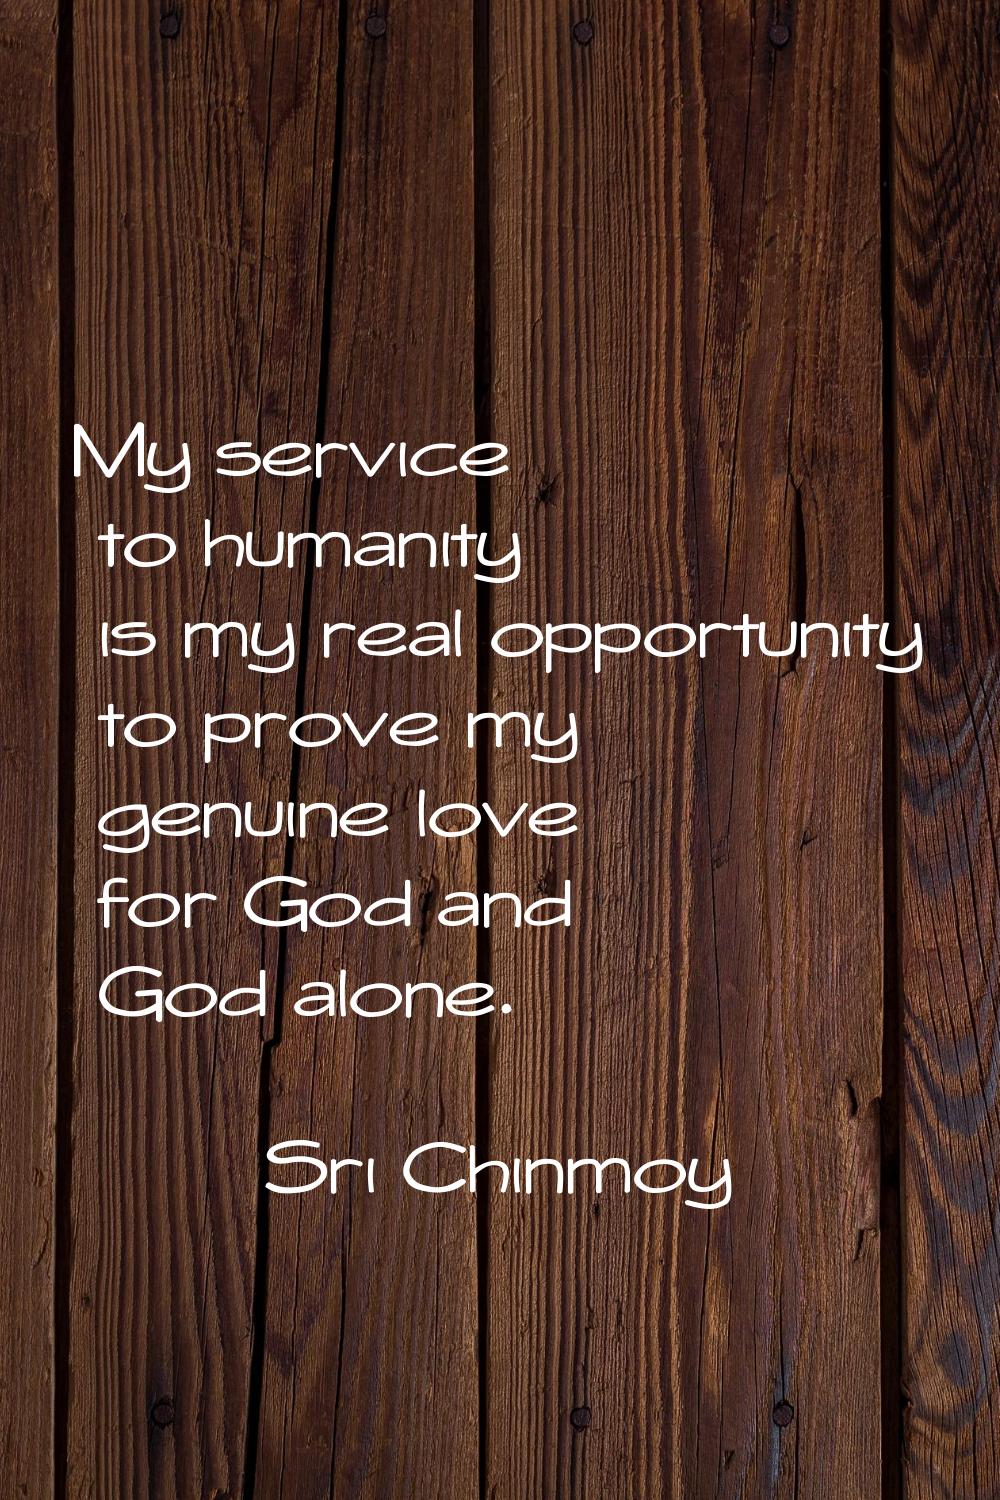 My service to humanity is my real opportunity to prove my genuine love for God and God alone.